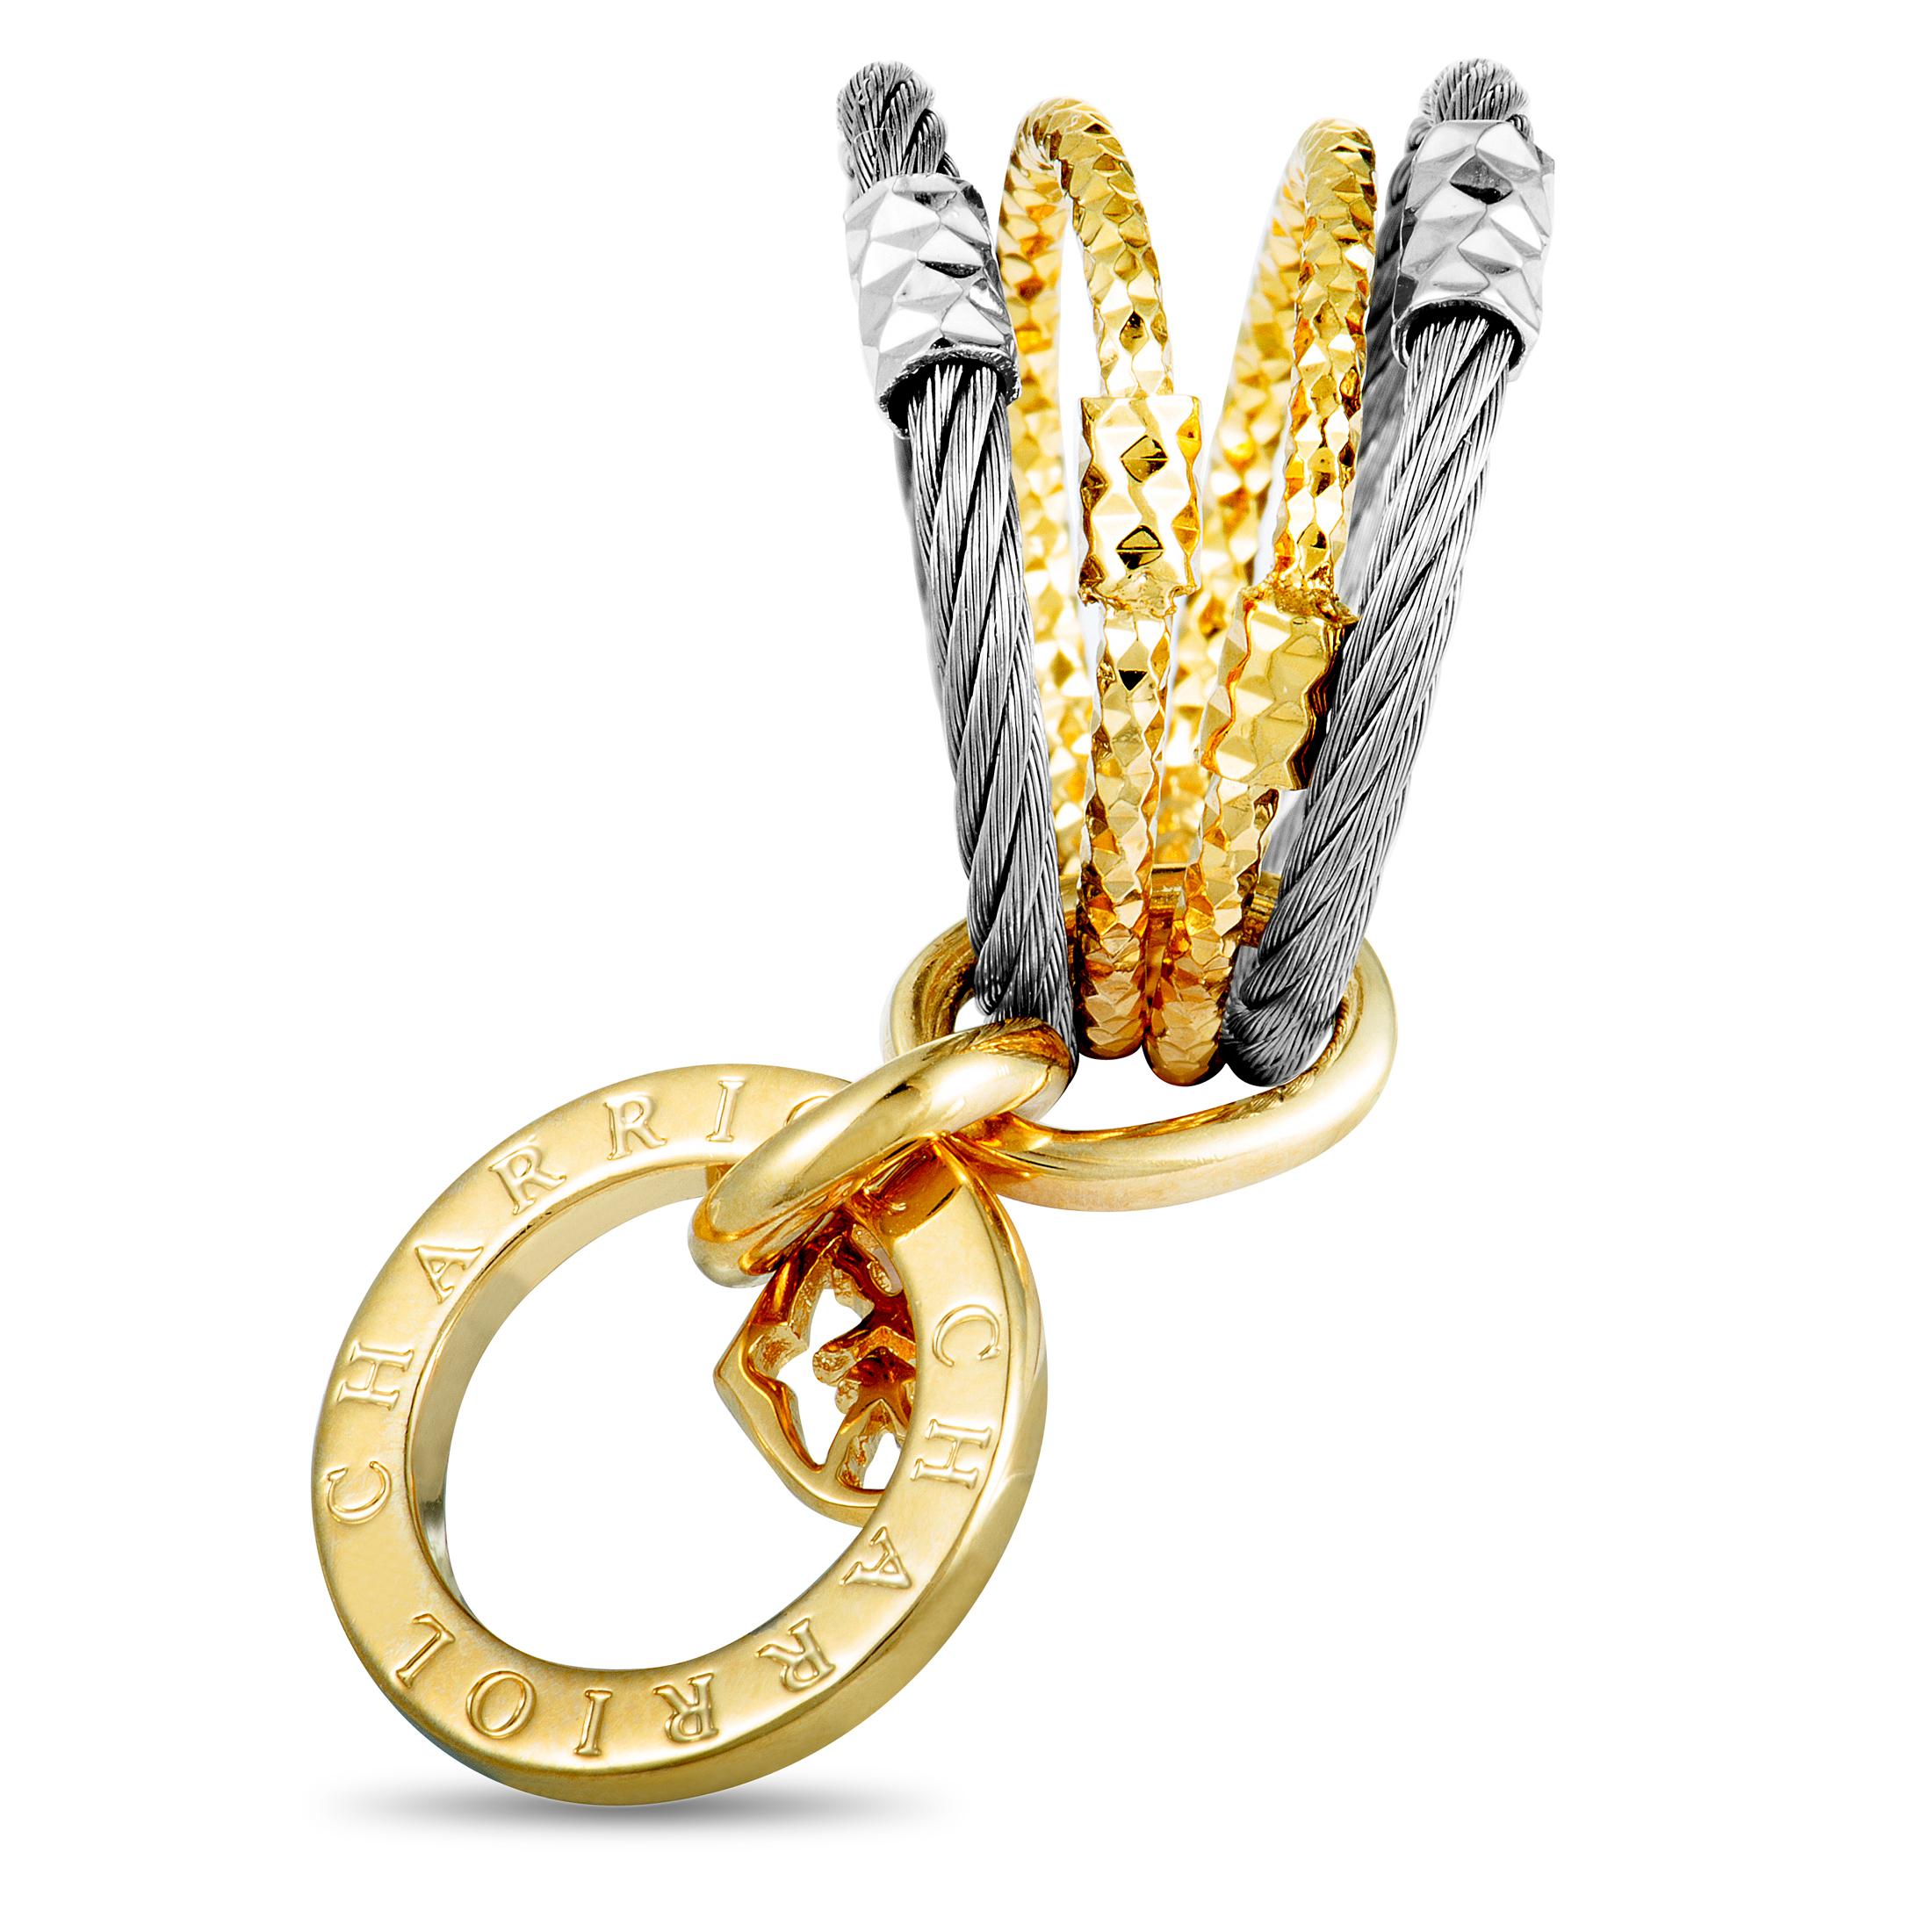 Charriol Fête du Jour Stainless Steel and Yellow PVD Signature Charm Band Ring 1